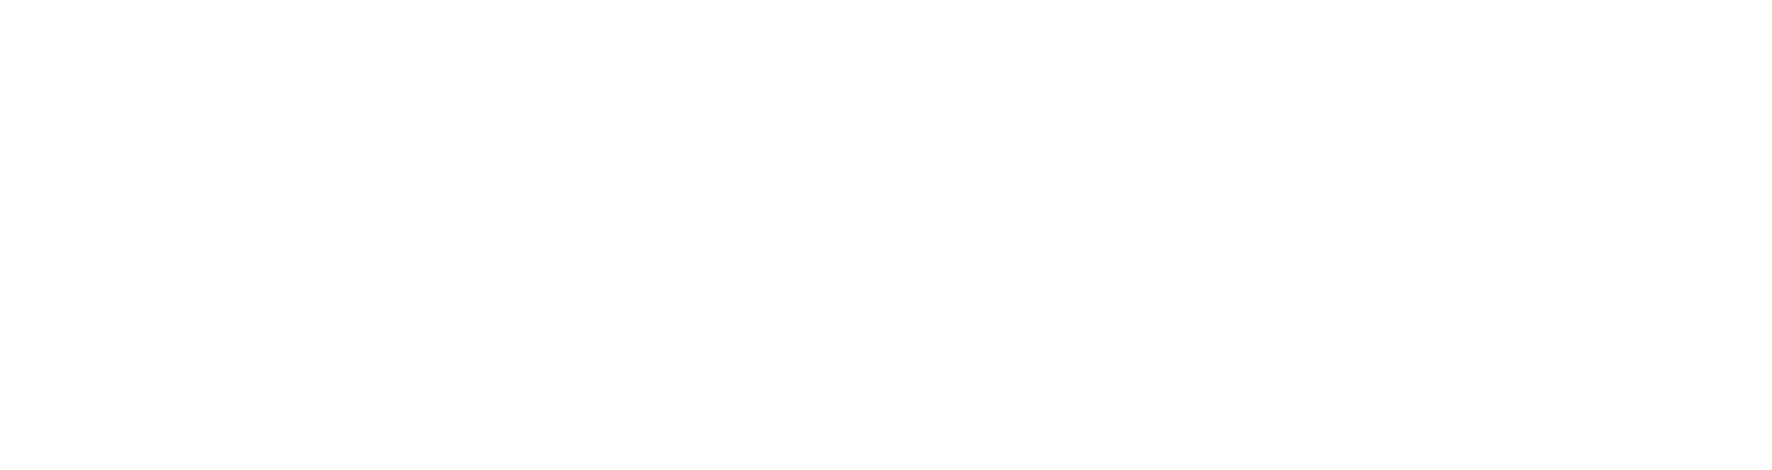 The Haunting of Bly Manor logo